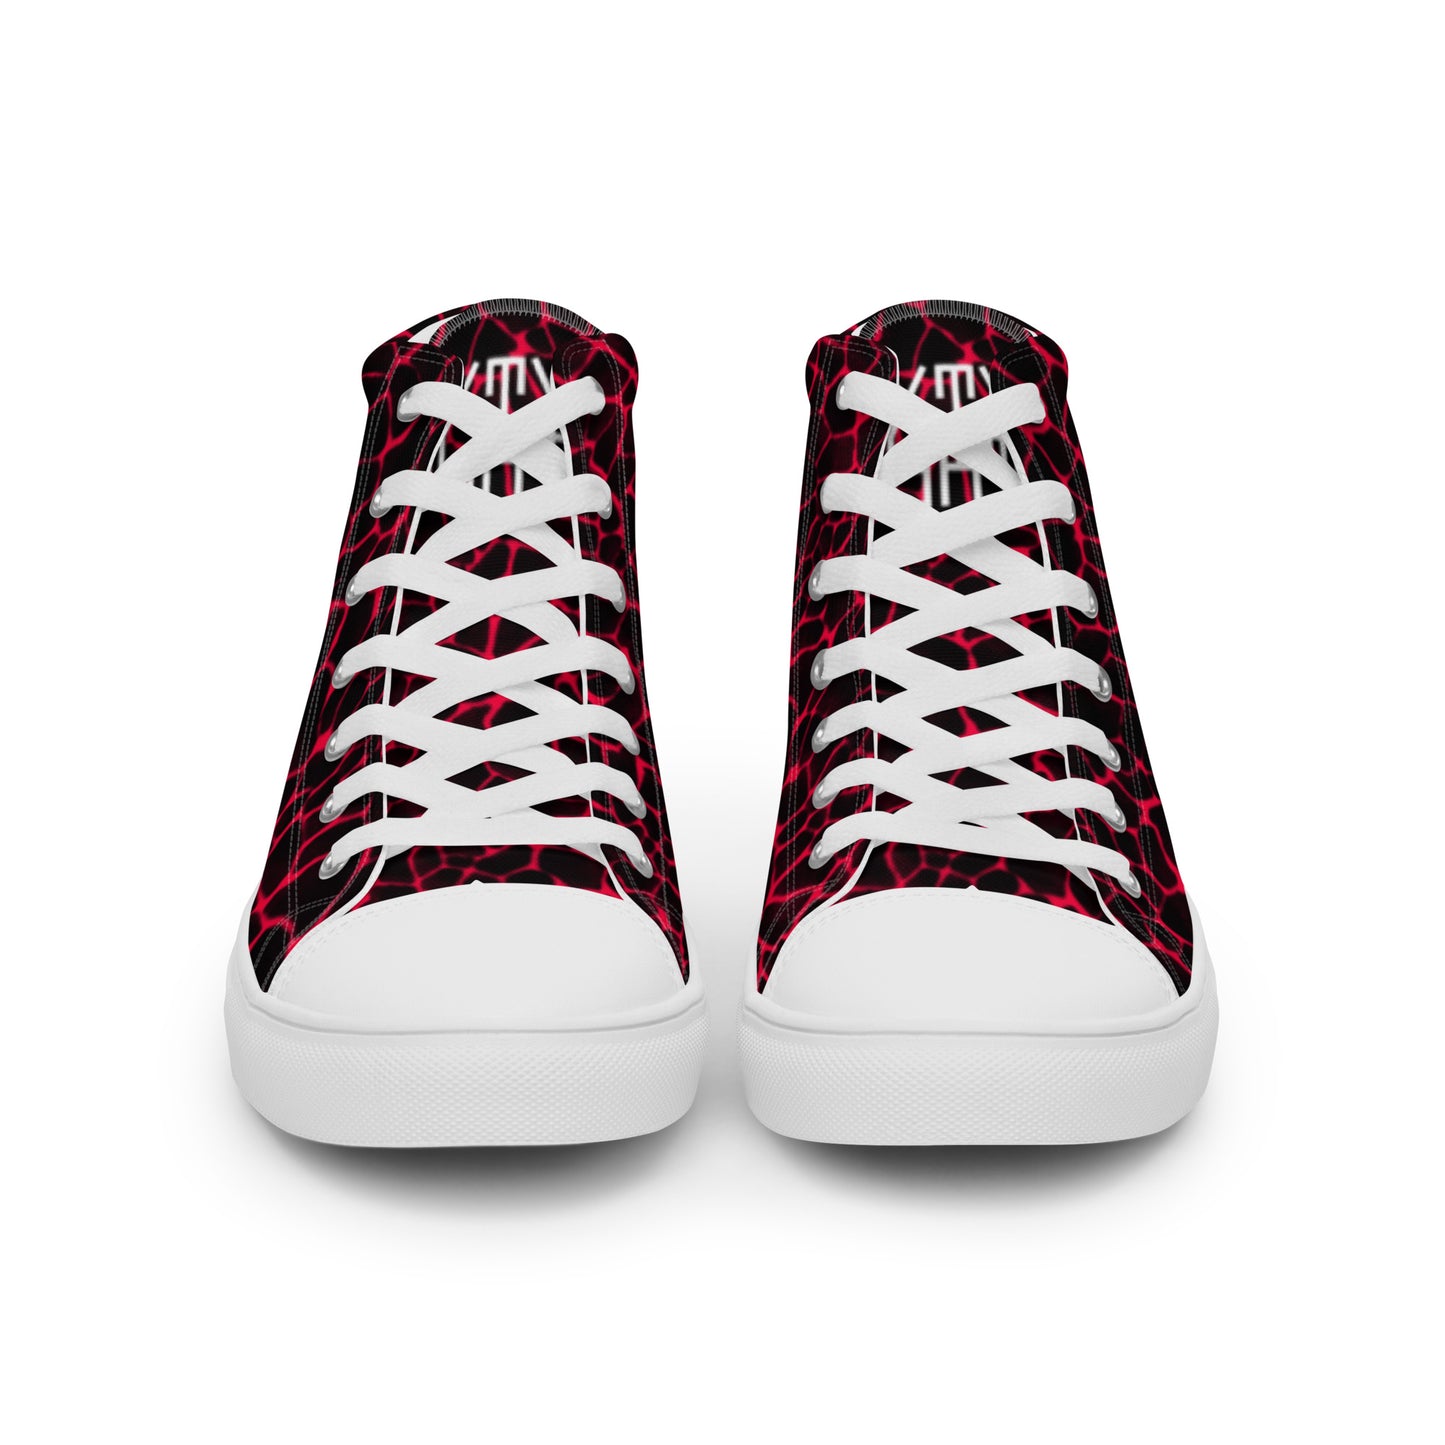 Sixty Eight 93 Logo White Boa Red & Black Women's High Top Shoes